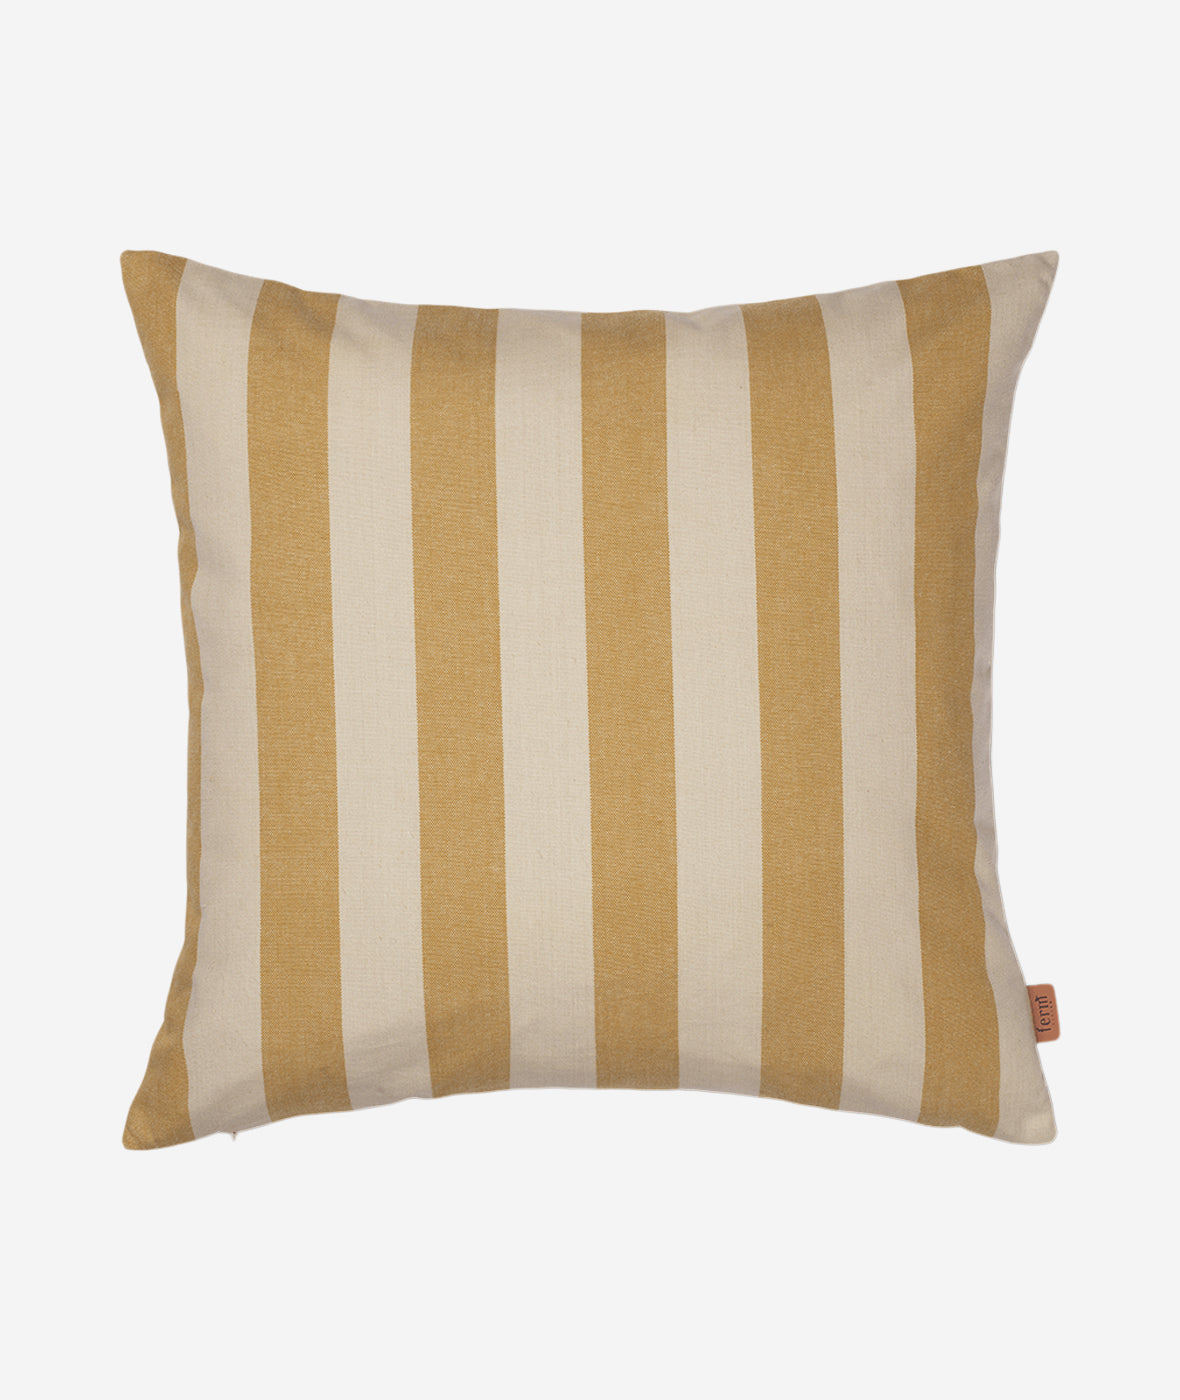 Strand Outdoor Pillow - More Options